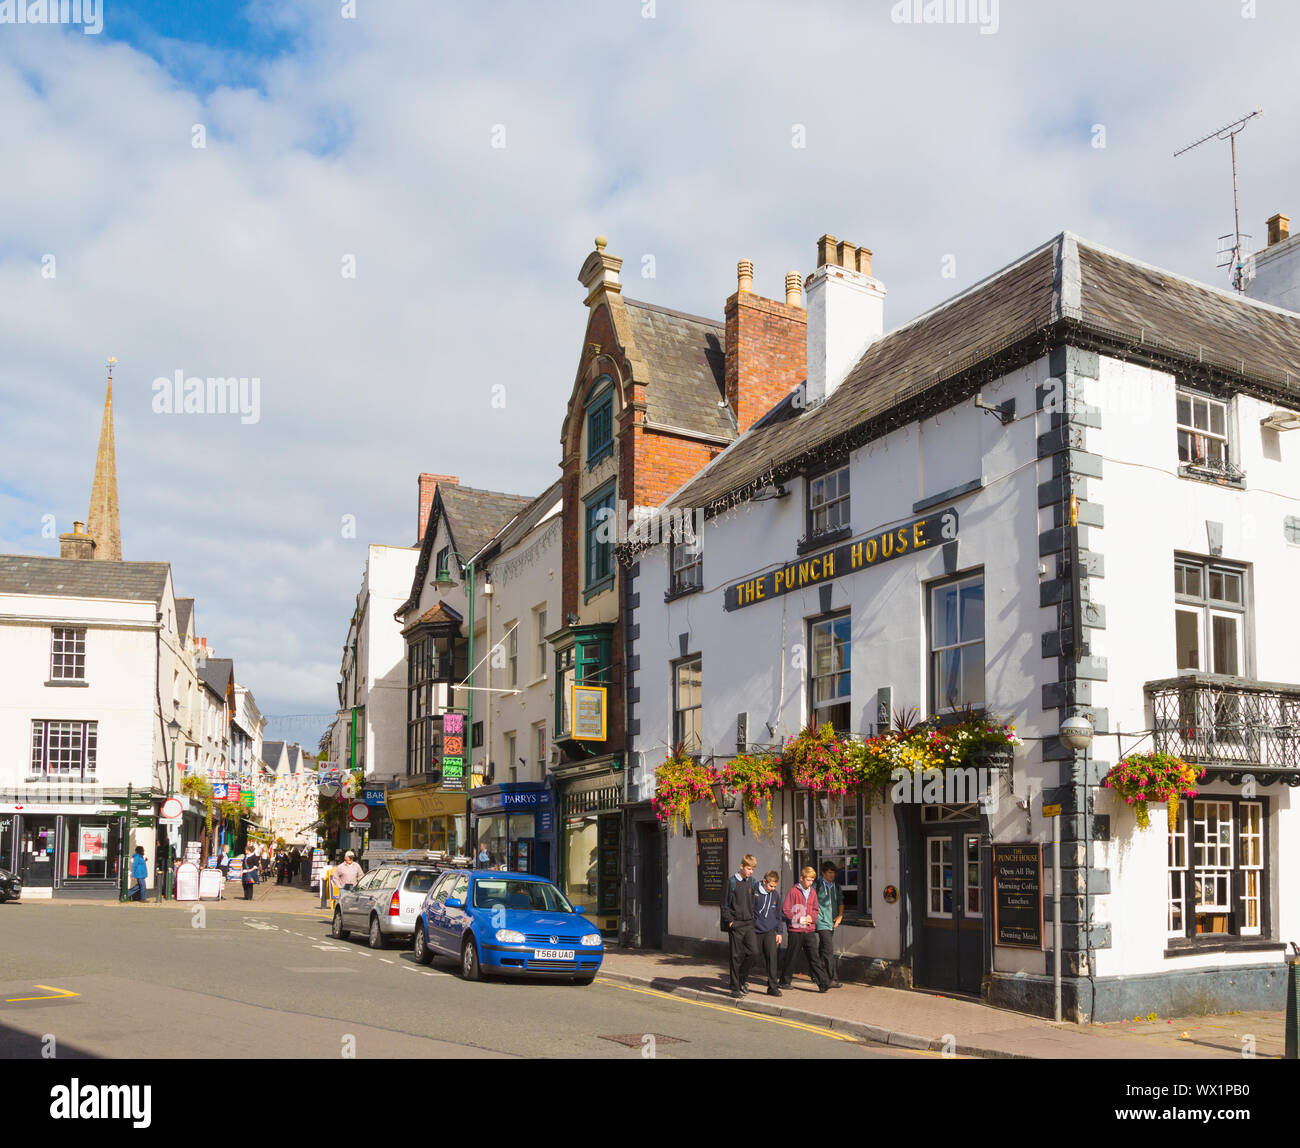 The Punch House, Agincourt Square, Monmouth, Monmouthshire, Gwent, Wales, United Kingdom.  Records of the Punch House date back as far as 1769.  It is Stock Photo